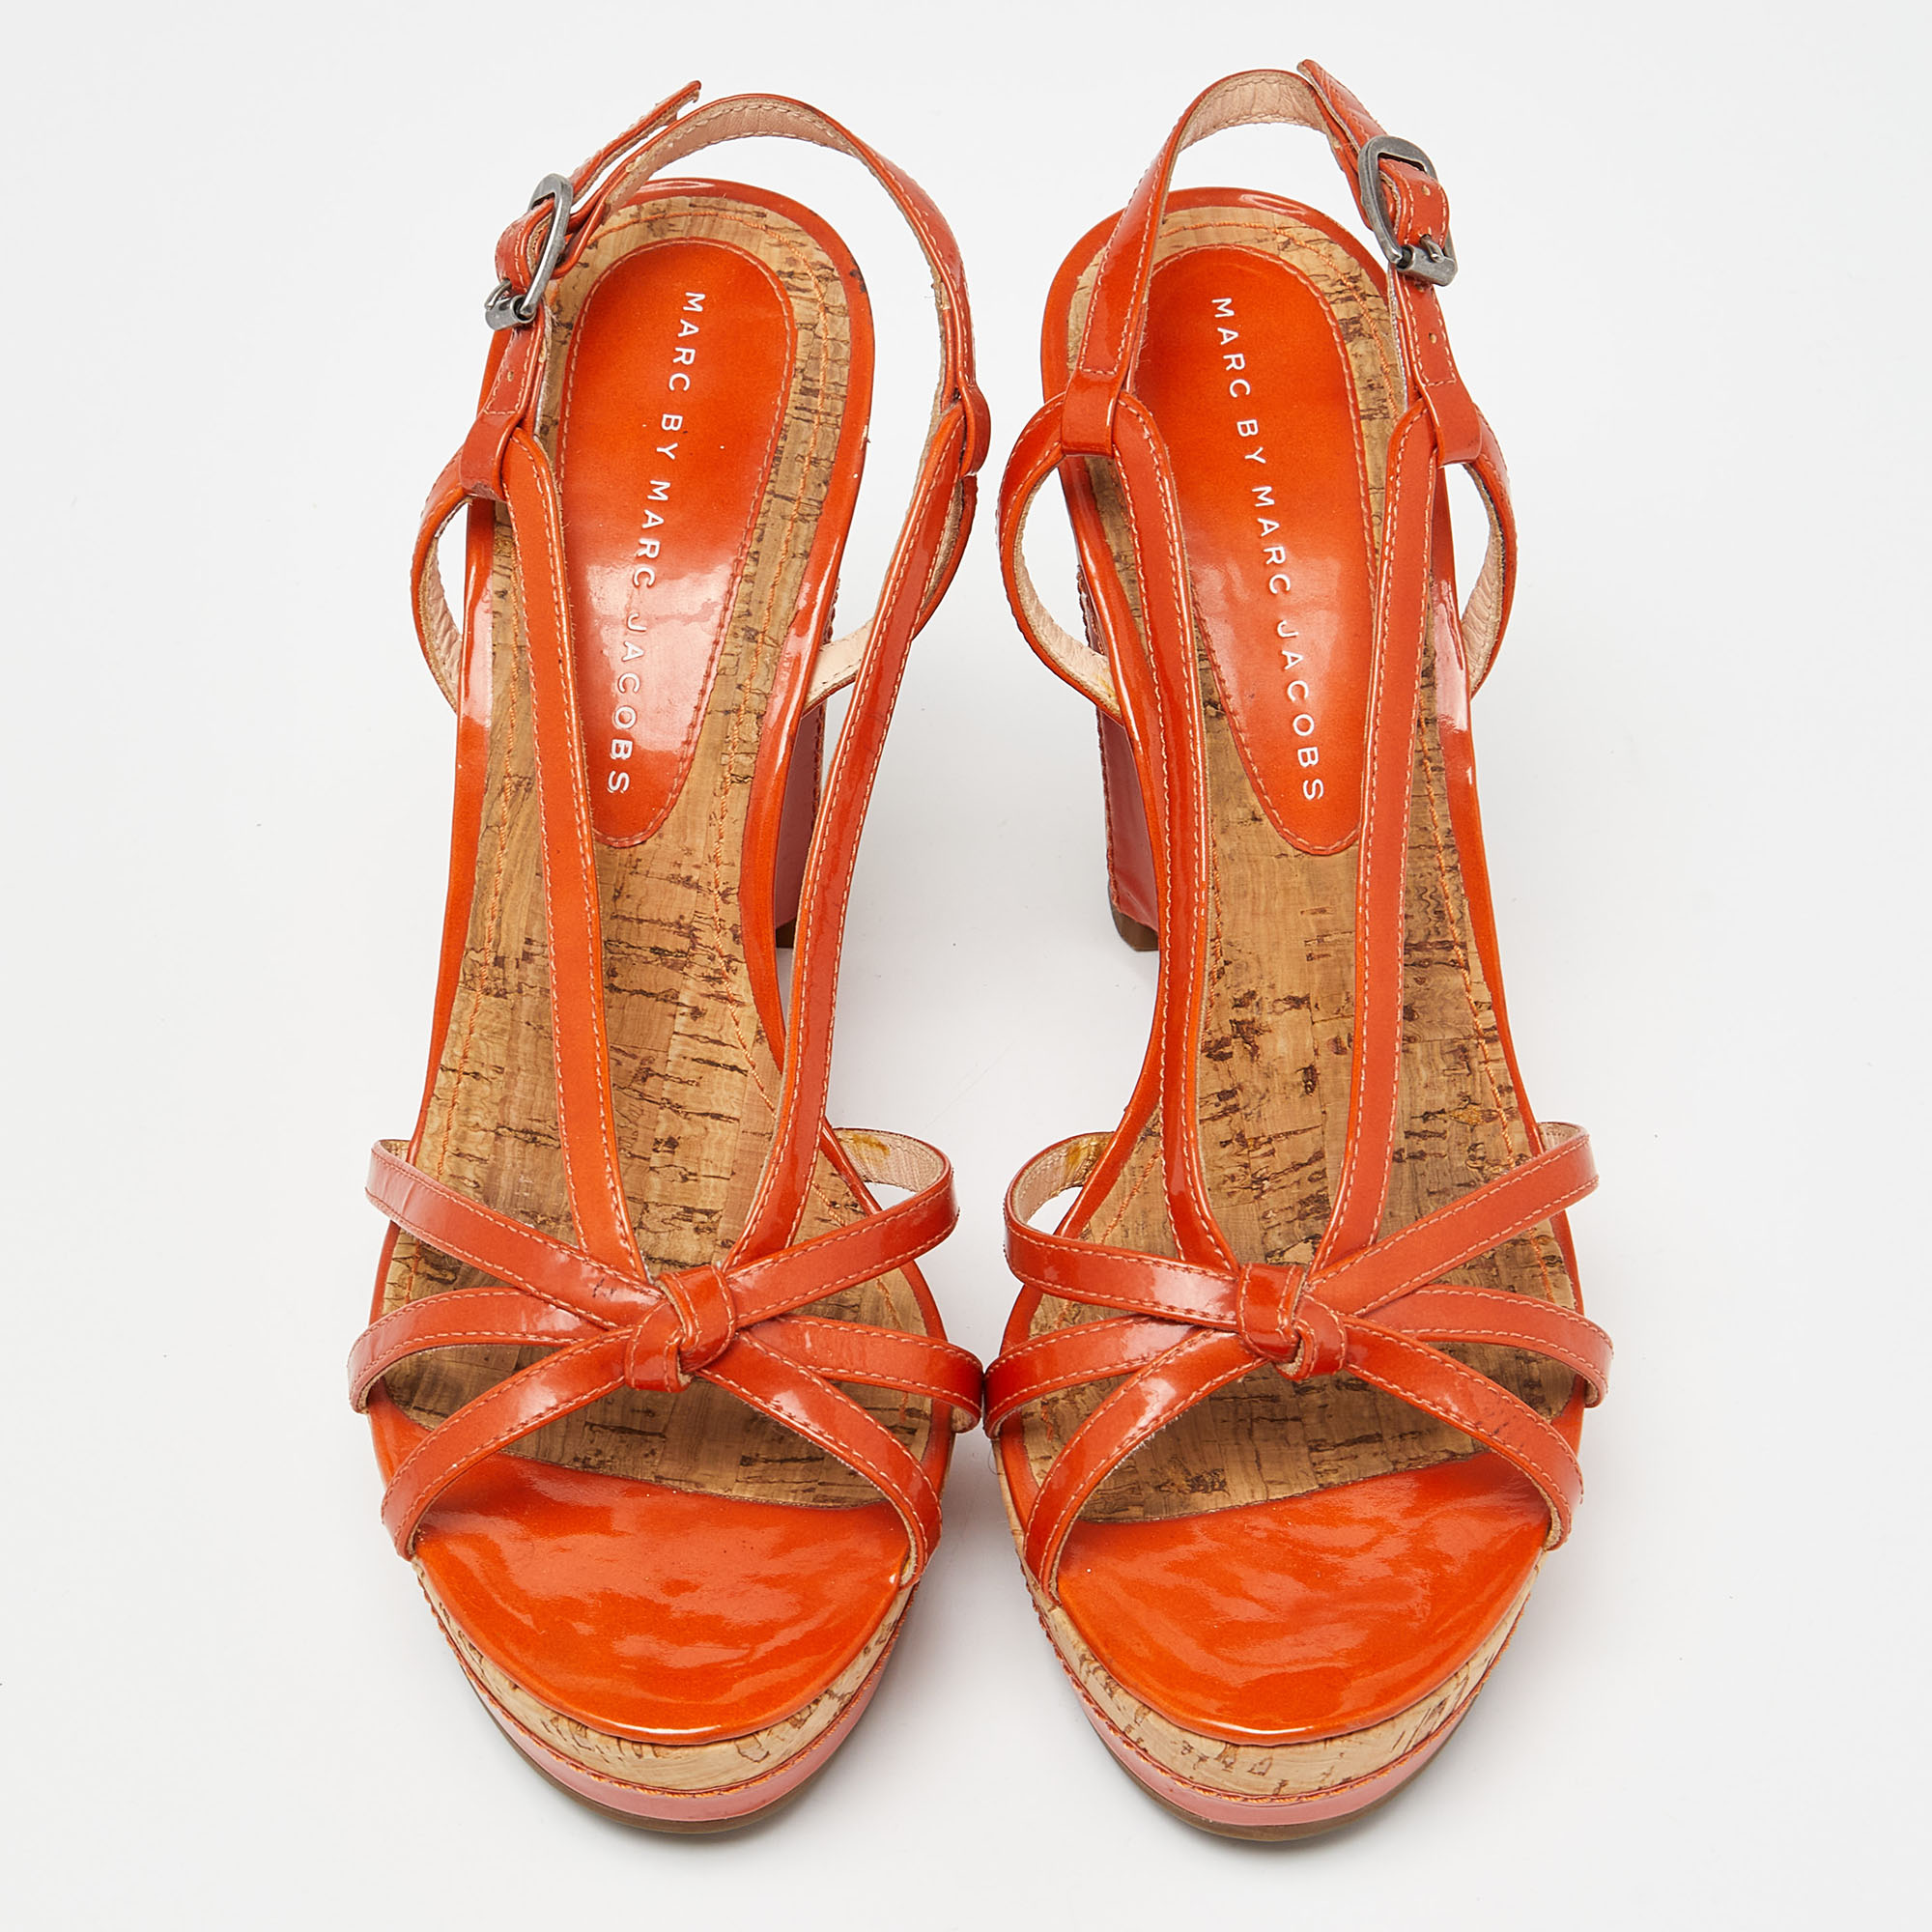 Marc By Marc Jacobs Orange Patent Leather Cork Wedge Slingback Sandals Size 37.5